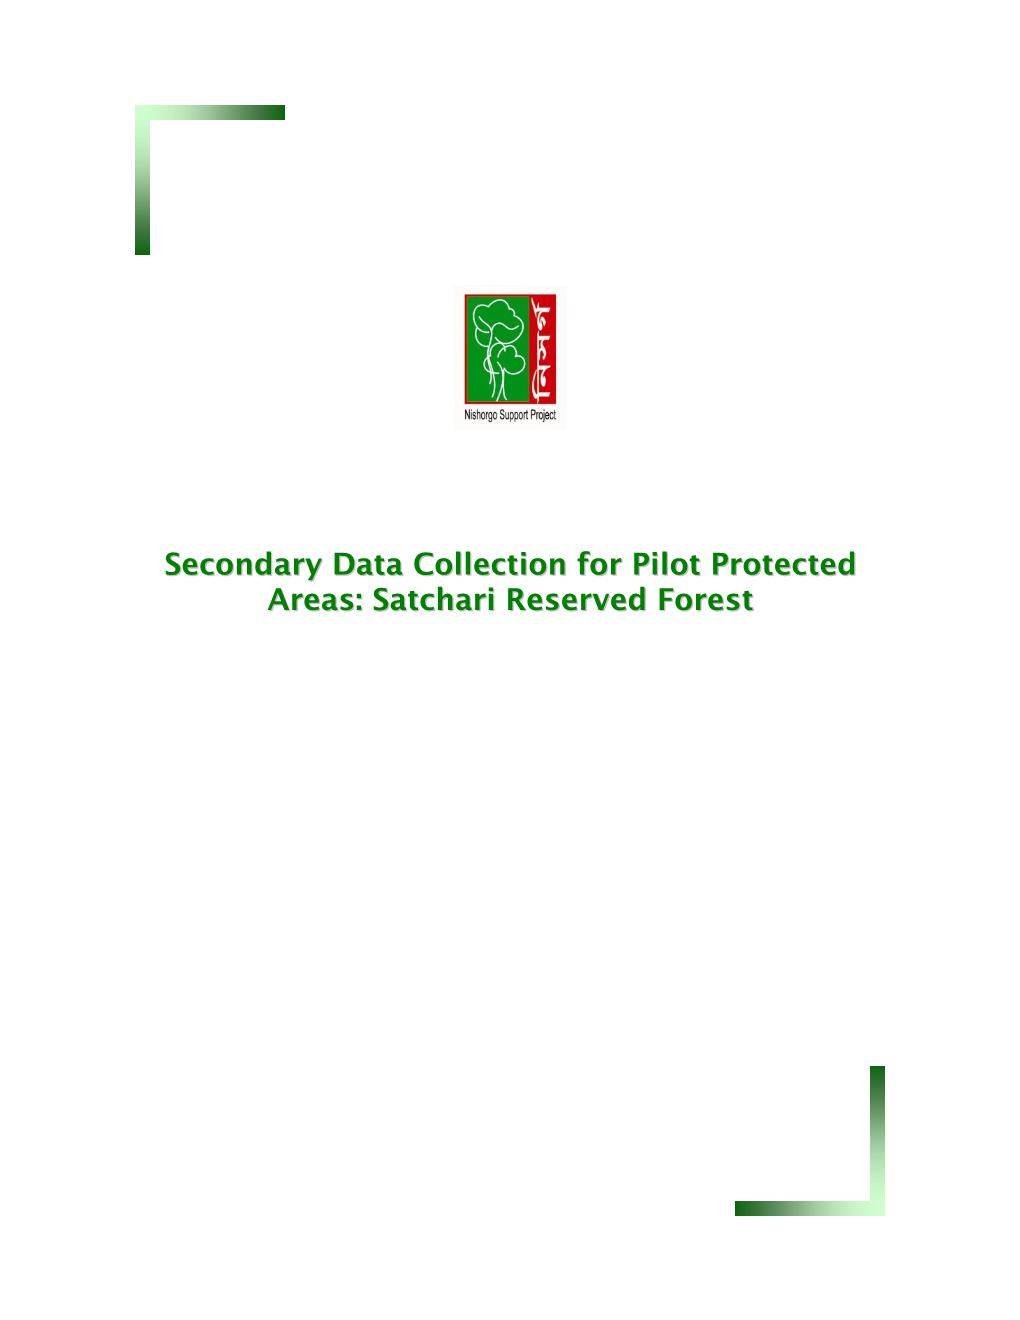 Secondary Data Collection for Pilot Protected Areas: Satchari Reserved Forest